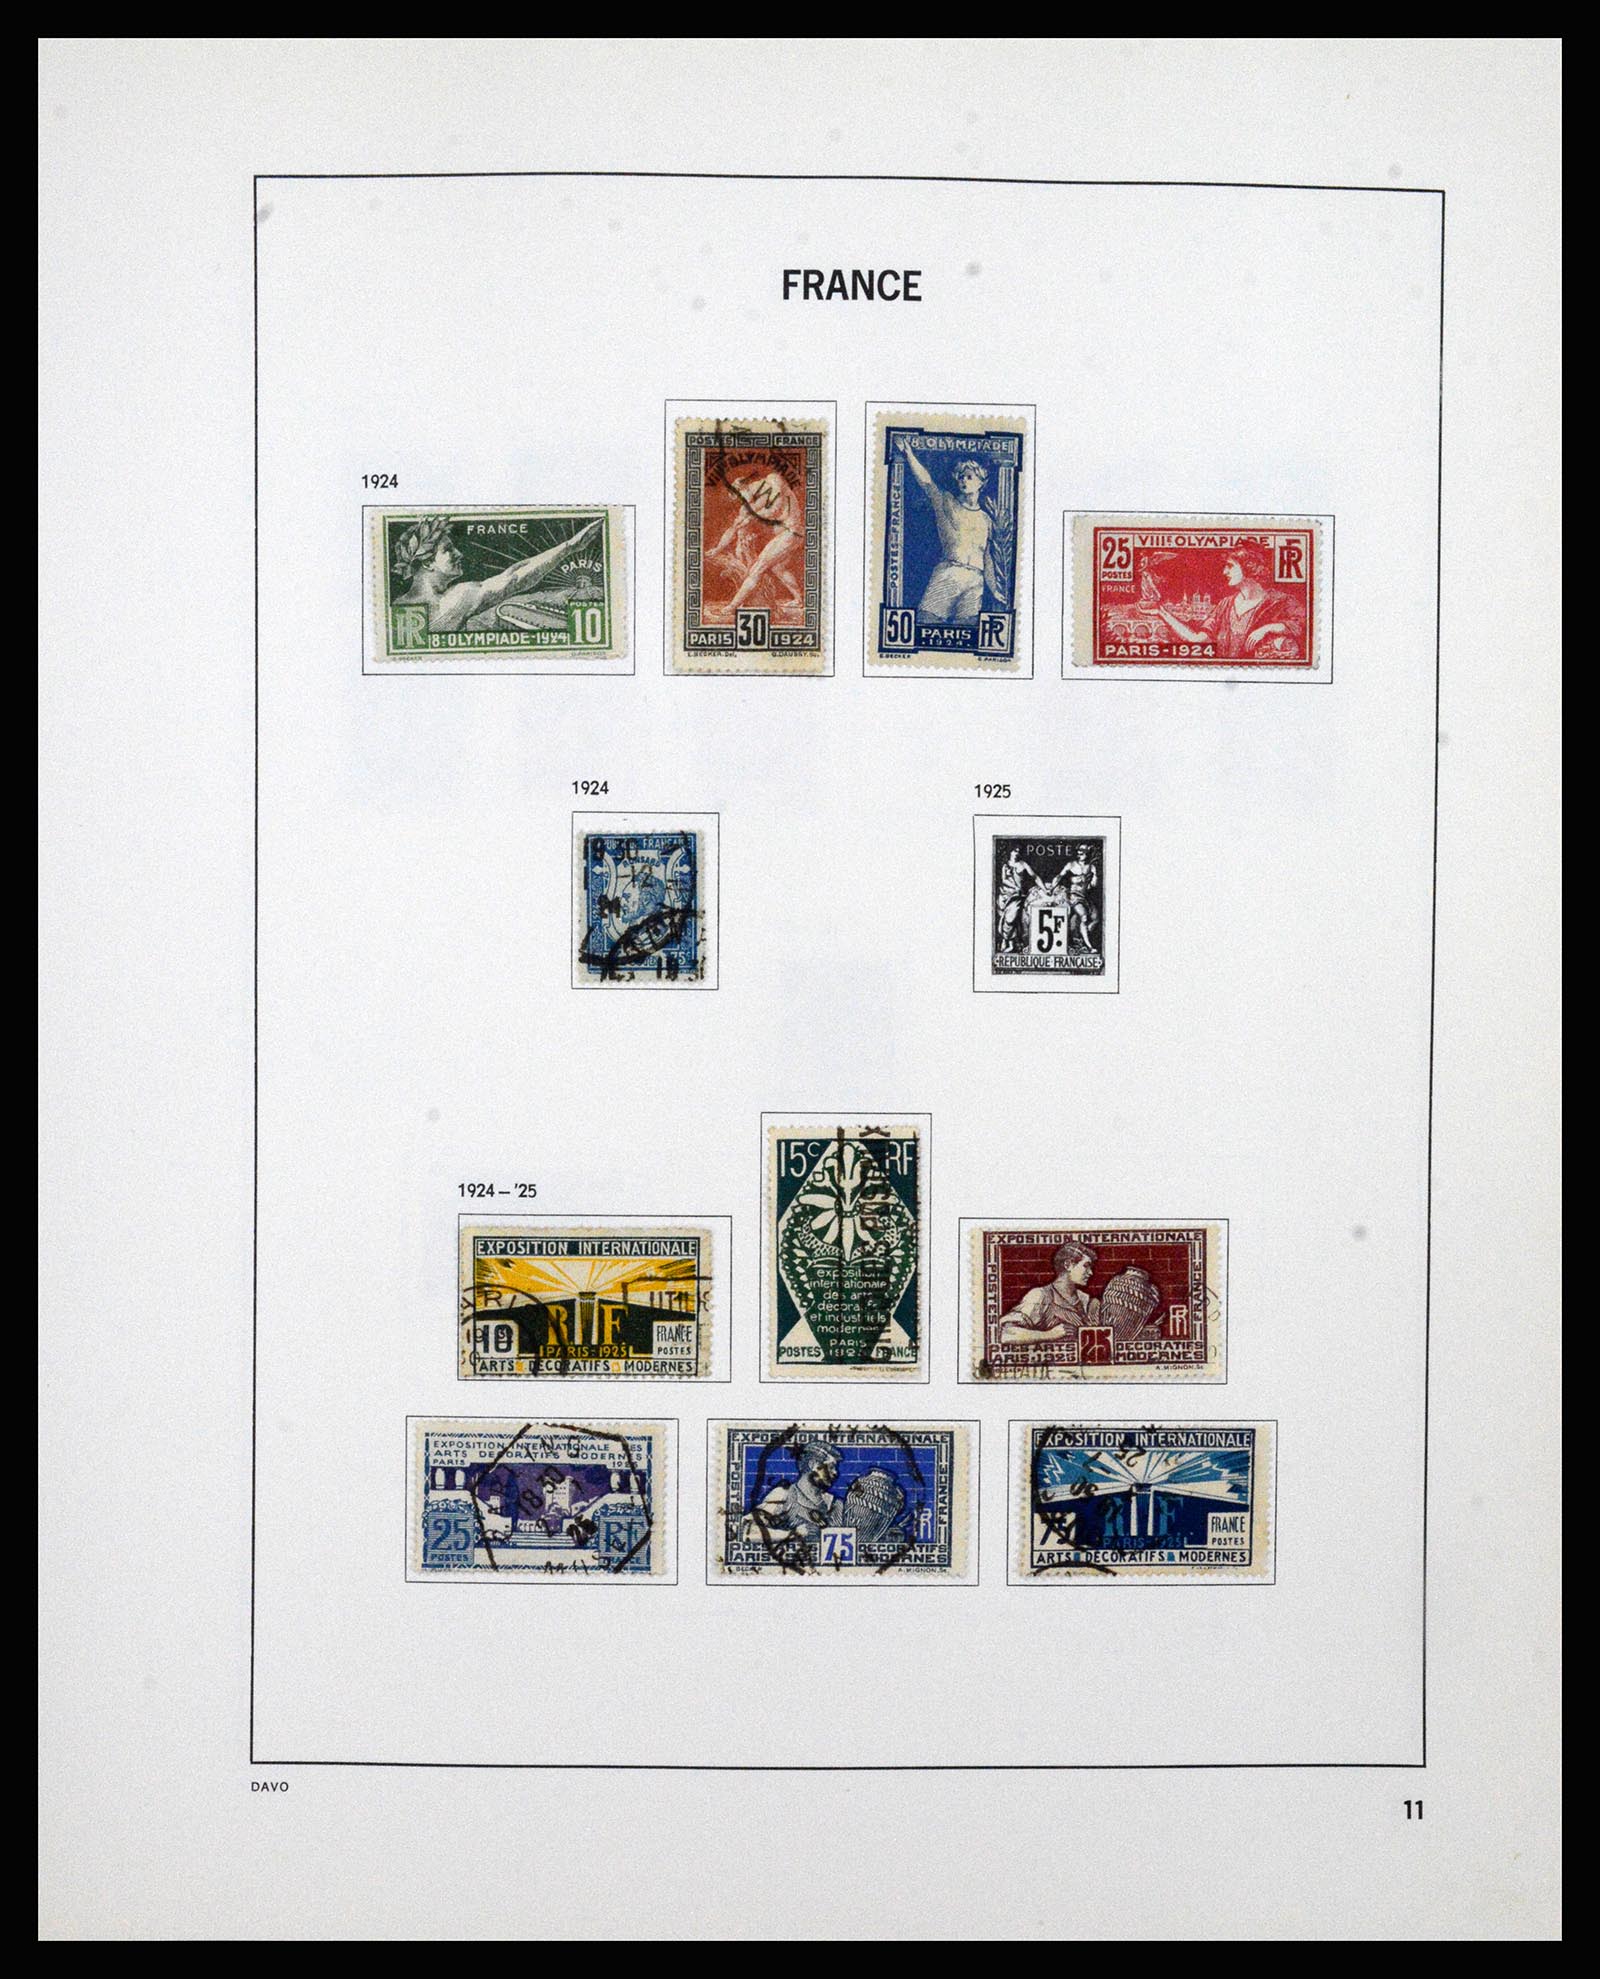 37236 011 - Stamp collection 37236 France 1849-1970.